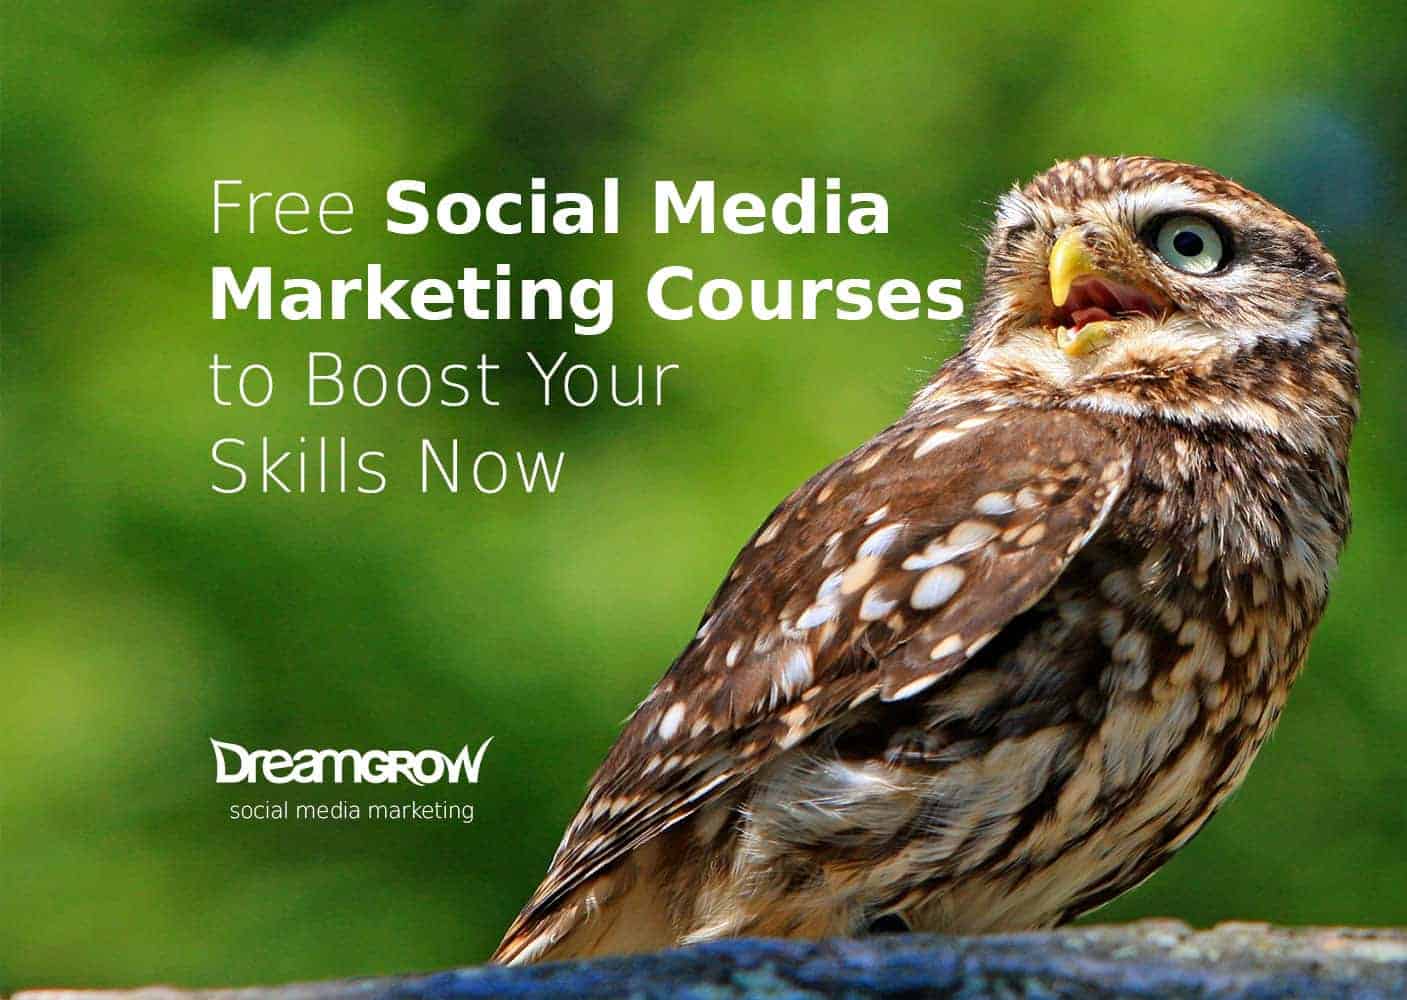 12 Free Social Media Marketing Courses to Boost Your Skills Now - Dreamgrow